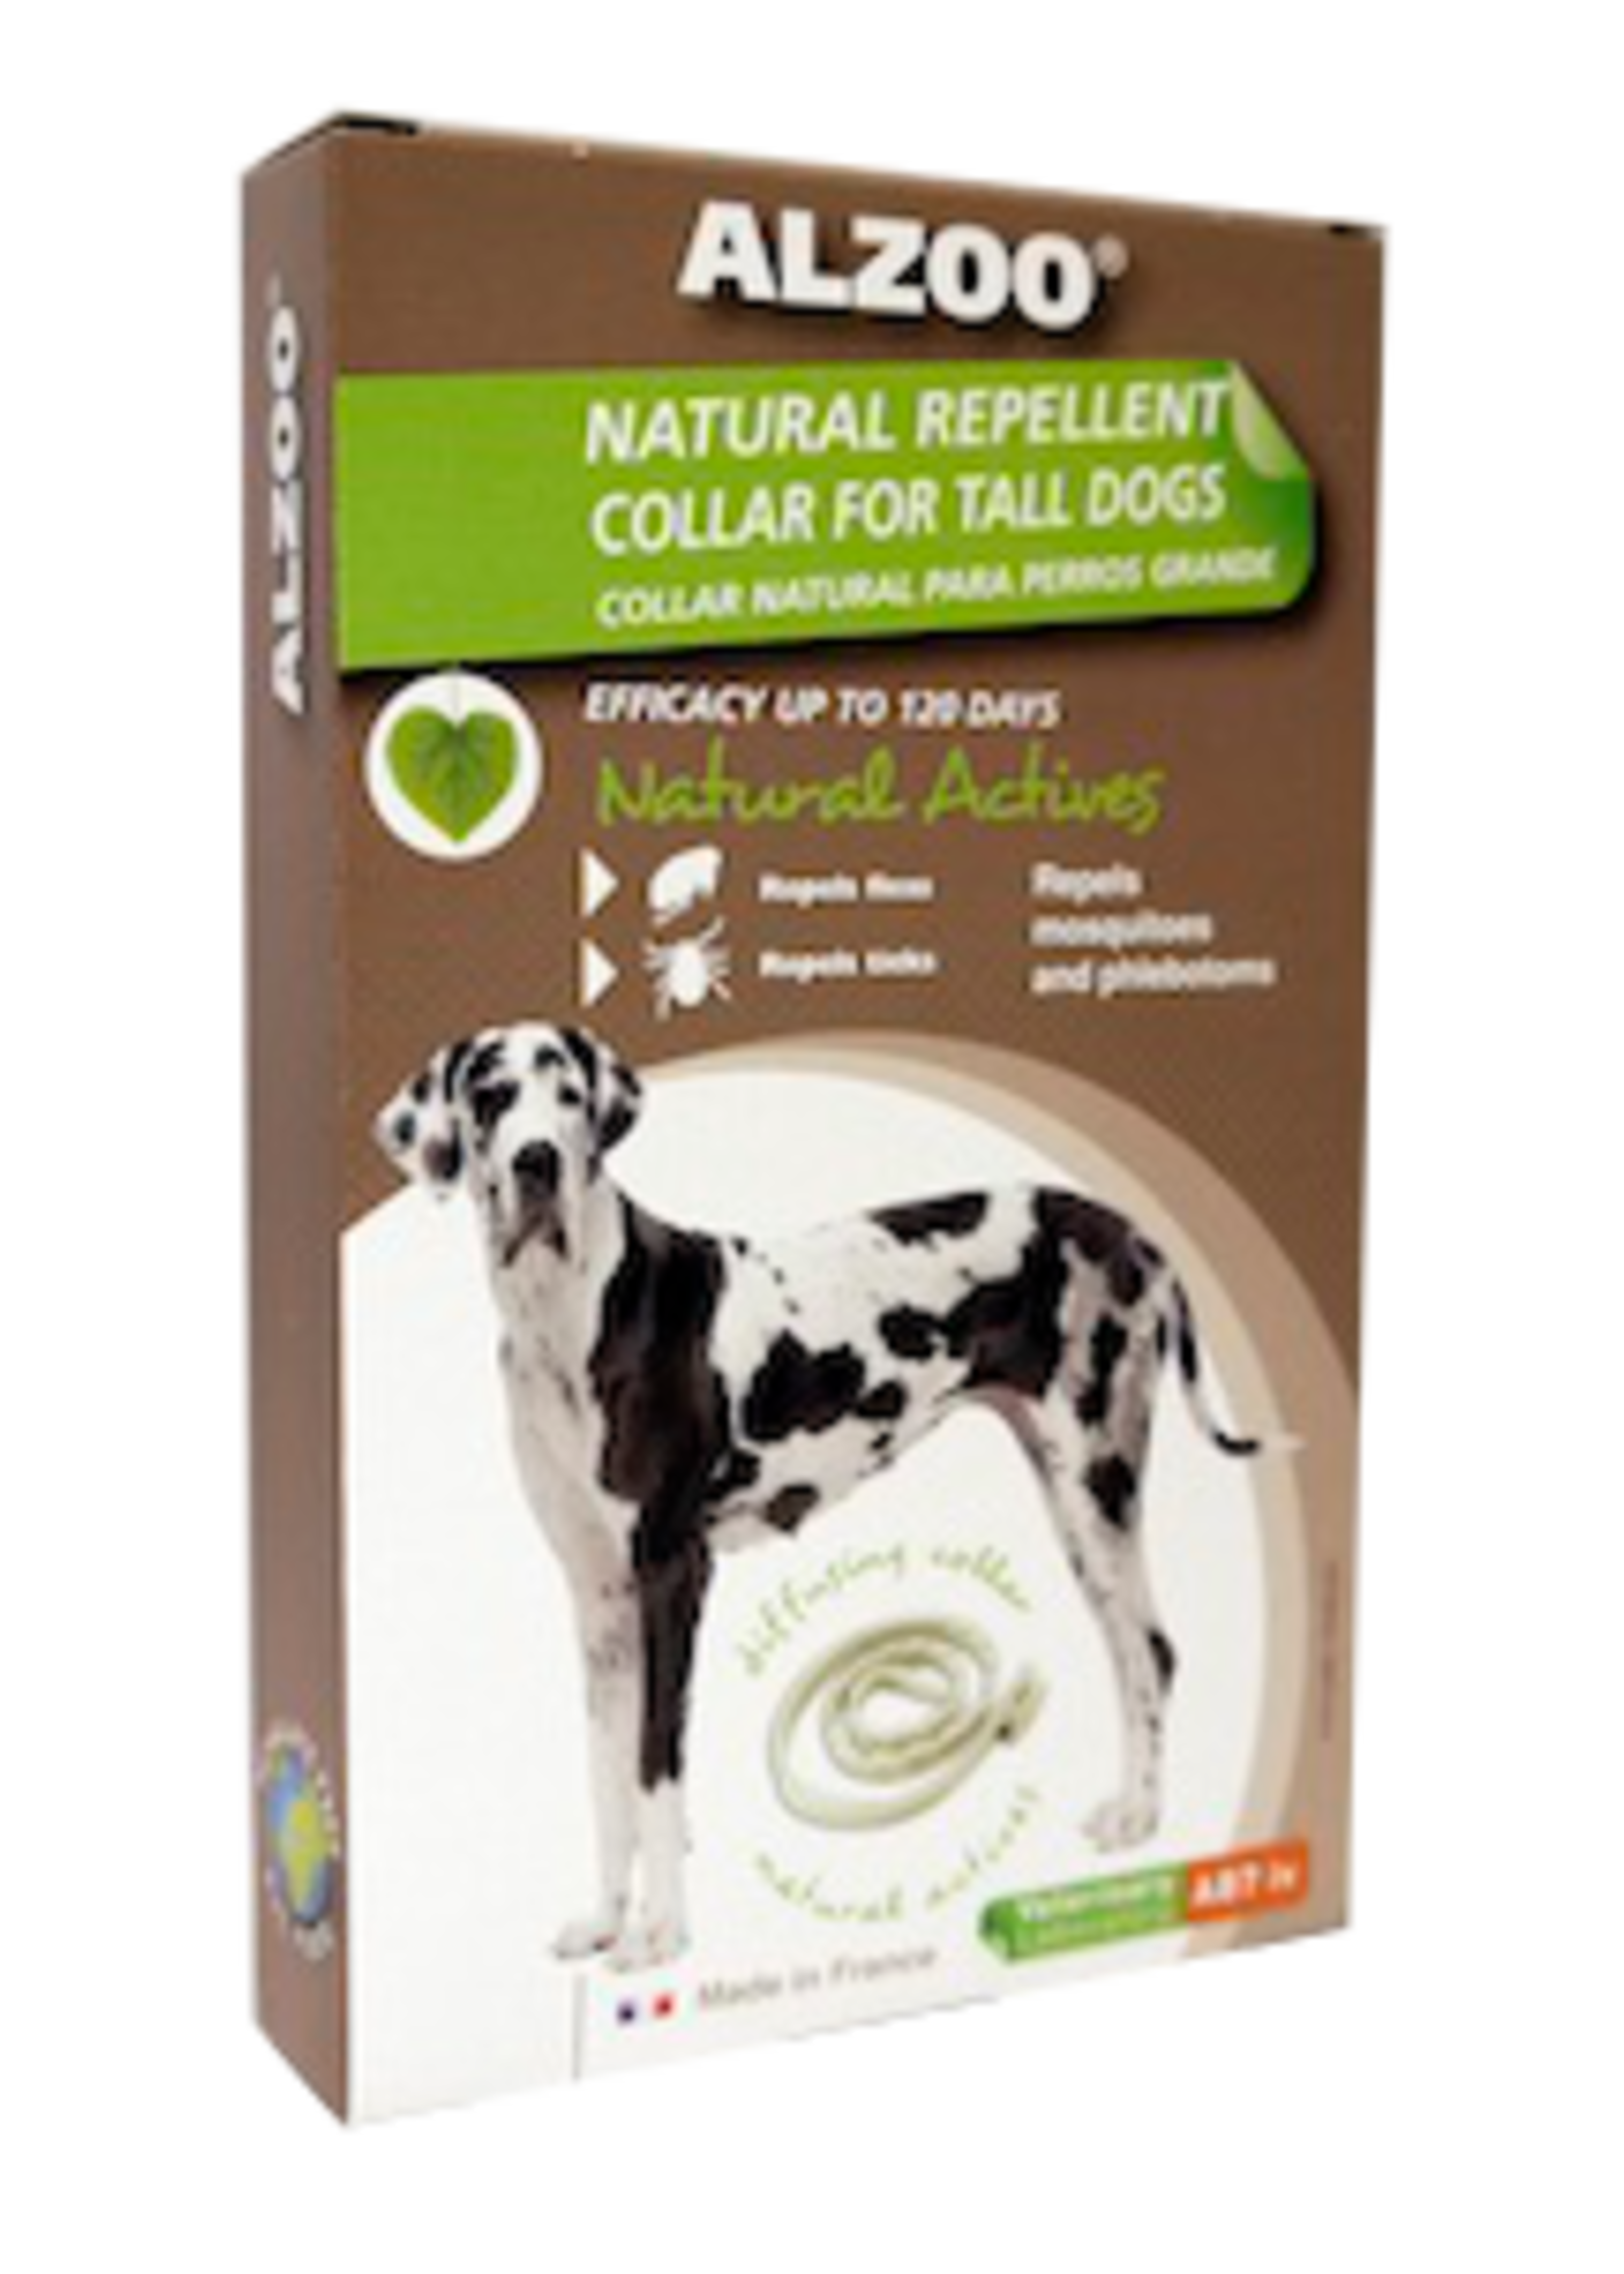 AB7 America Inc. ALZOO Natural Repellent Collar for Dogs (Large)